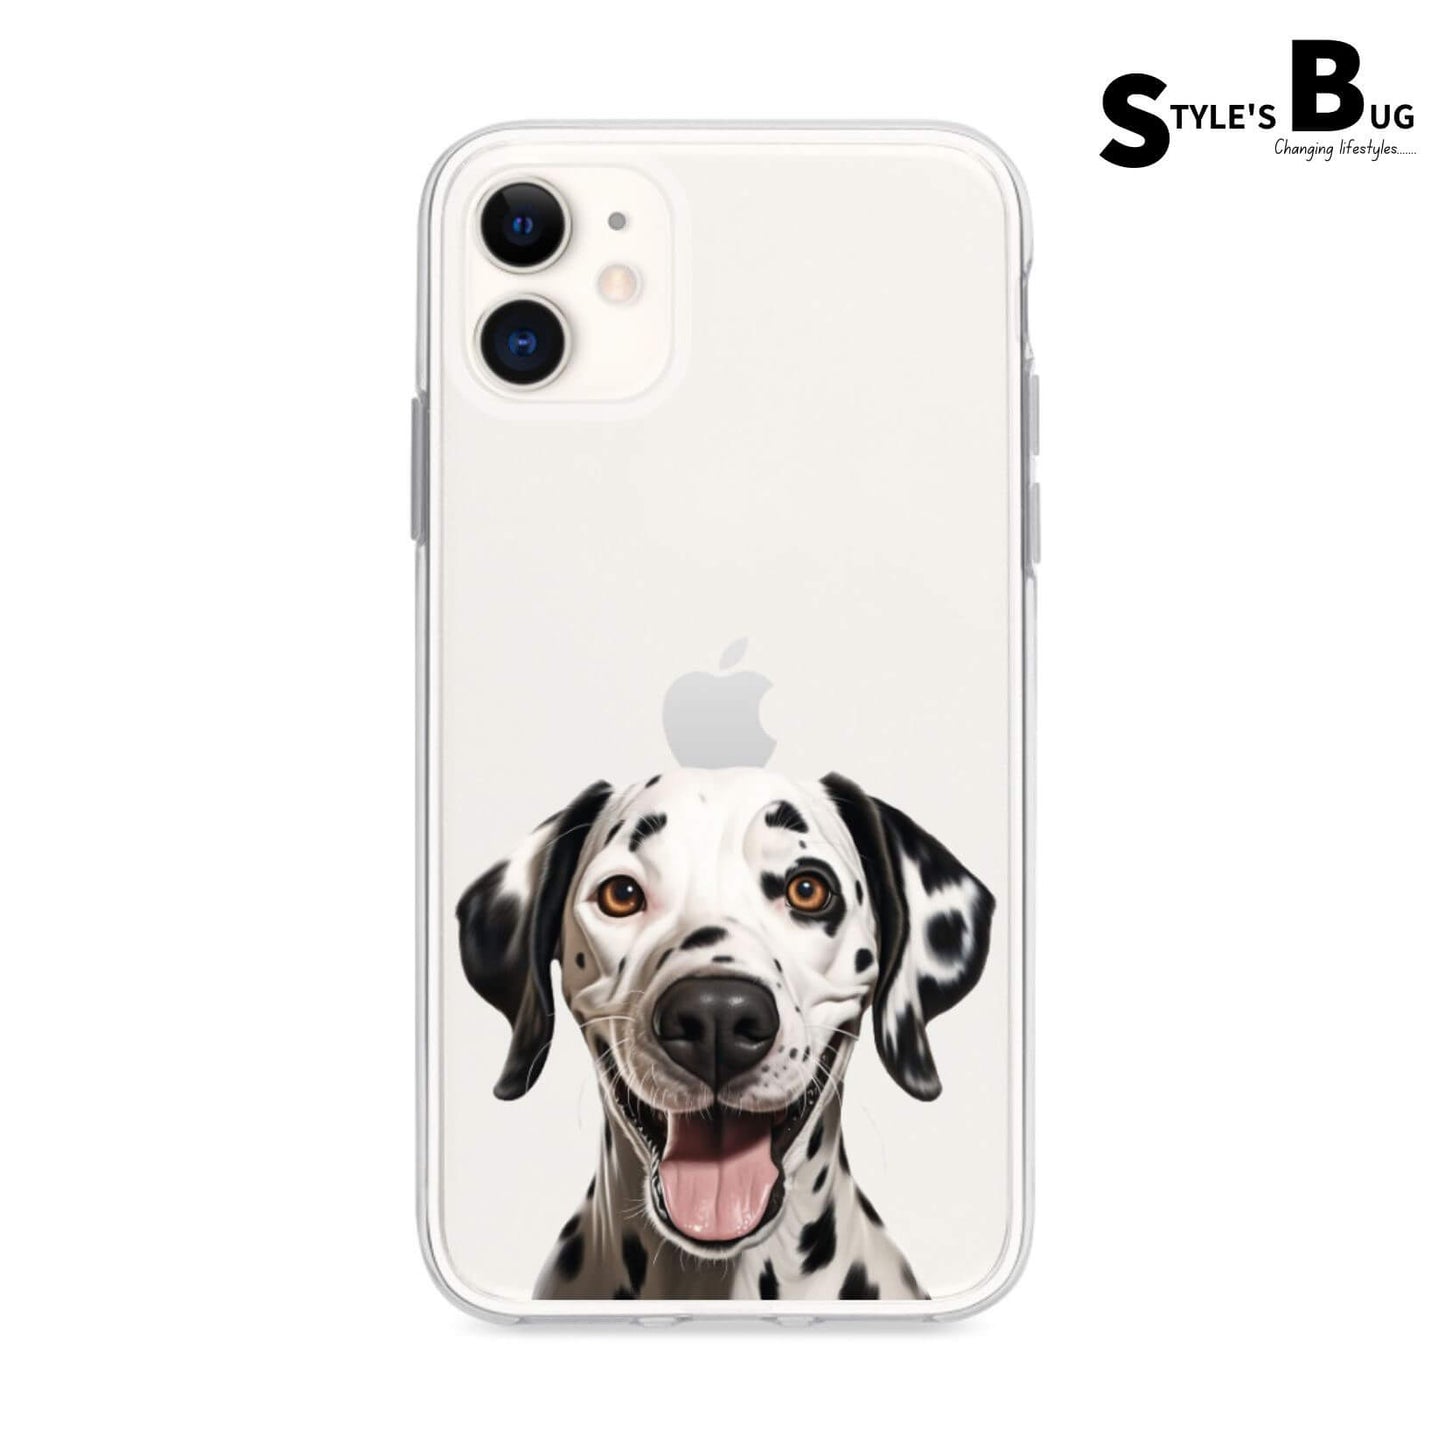 Smiling Dog phone cases from Style's Bug (UV printed) - Style's Bug Dalmatian